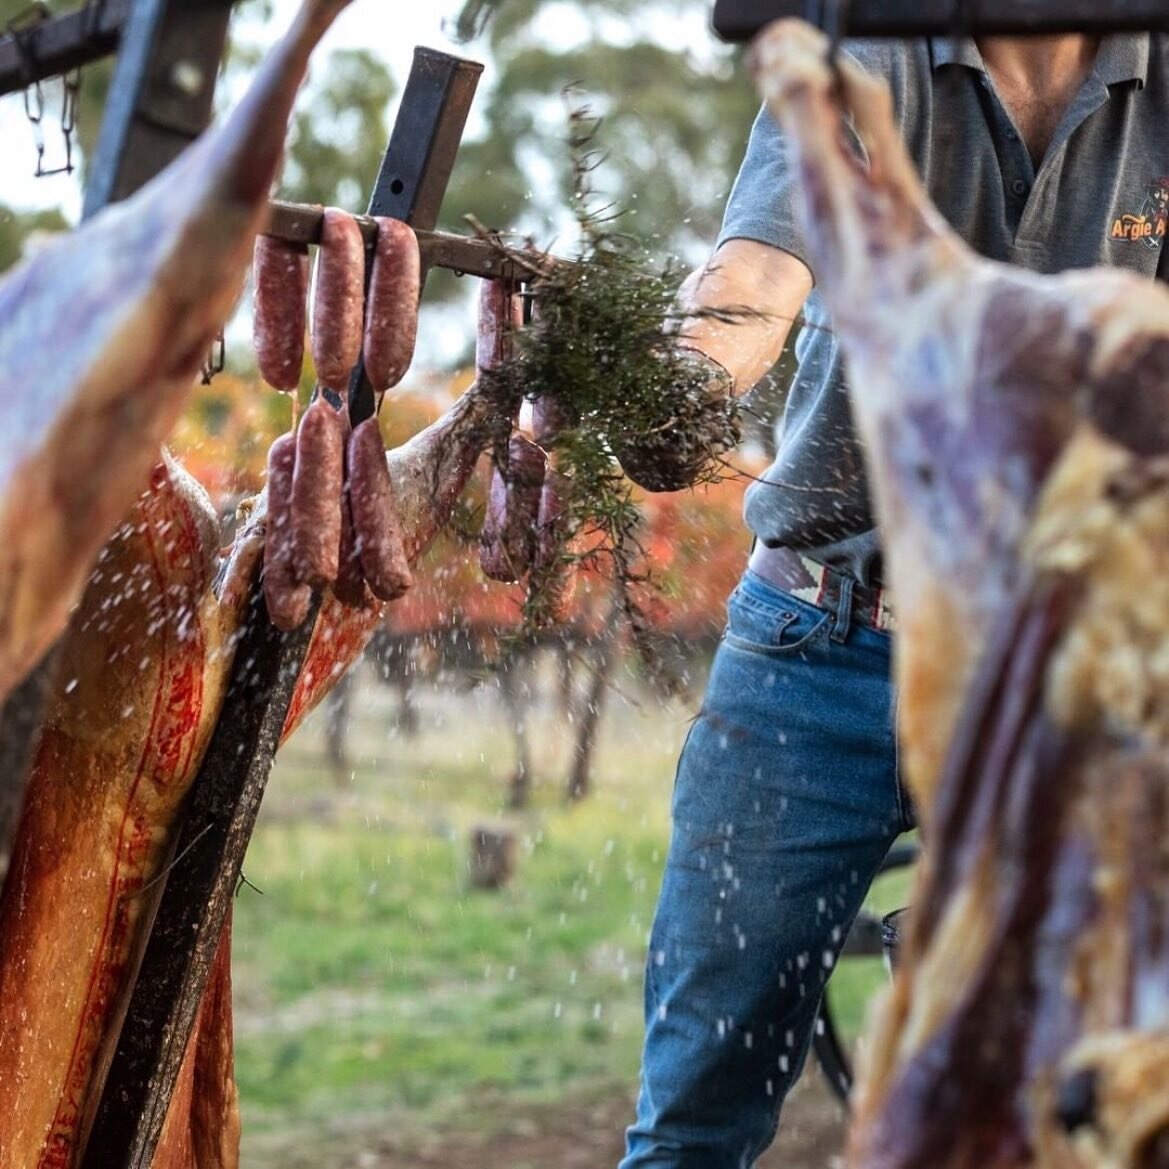 Only 2 weeks left until our @tastingaustralia Asado with @swellbeer in the McLaren Vale🔥 Get your tickets via the link in our bio 🎟